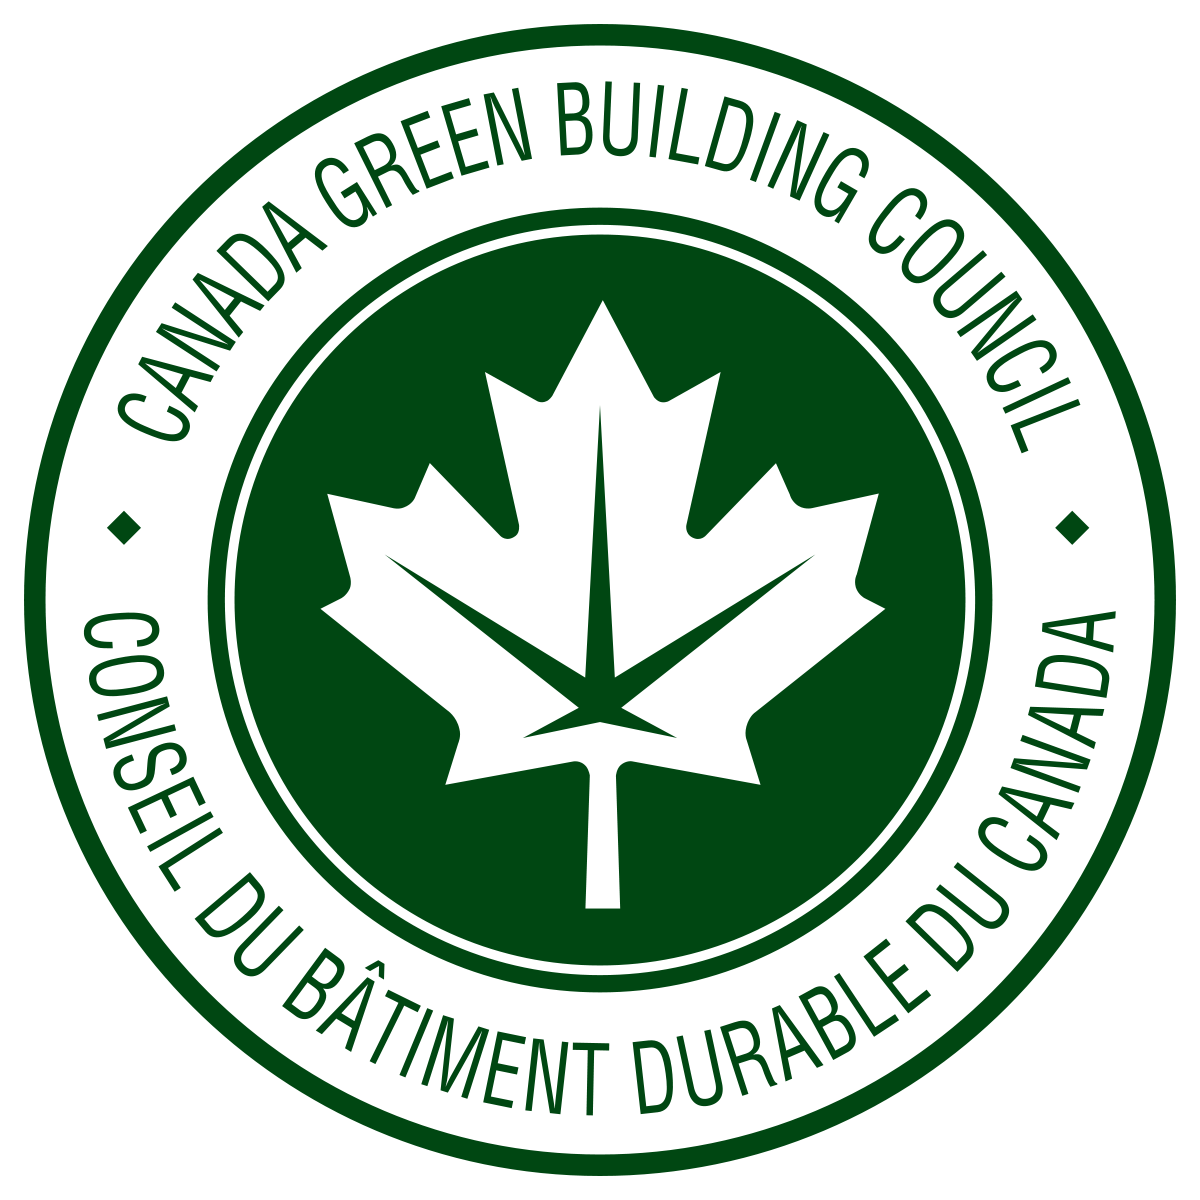 1200px-Canada_Green_Building_Council.svg.png